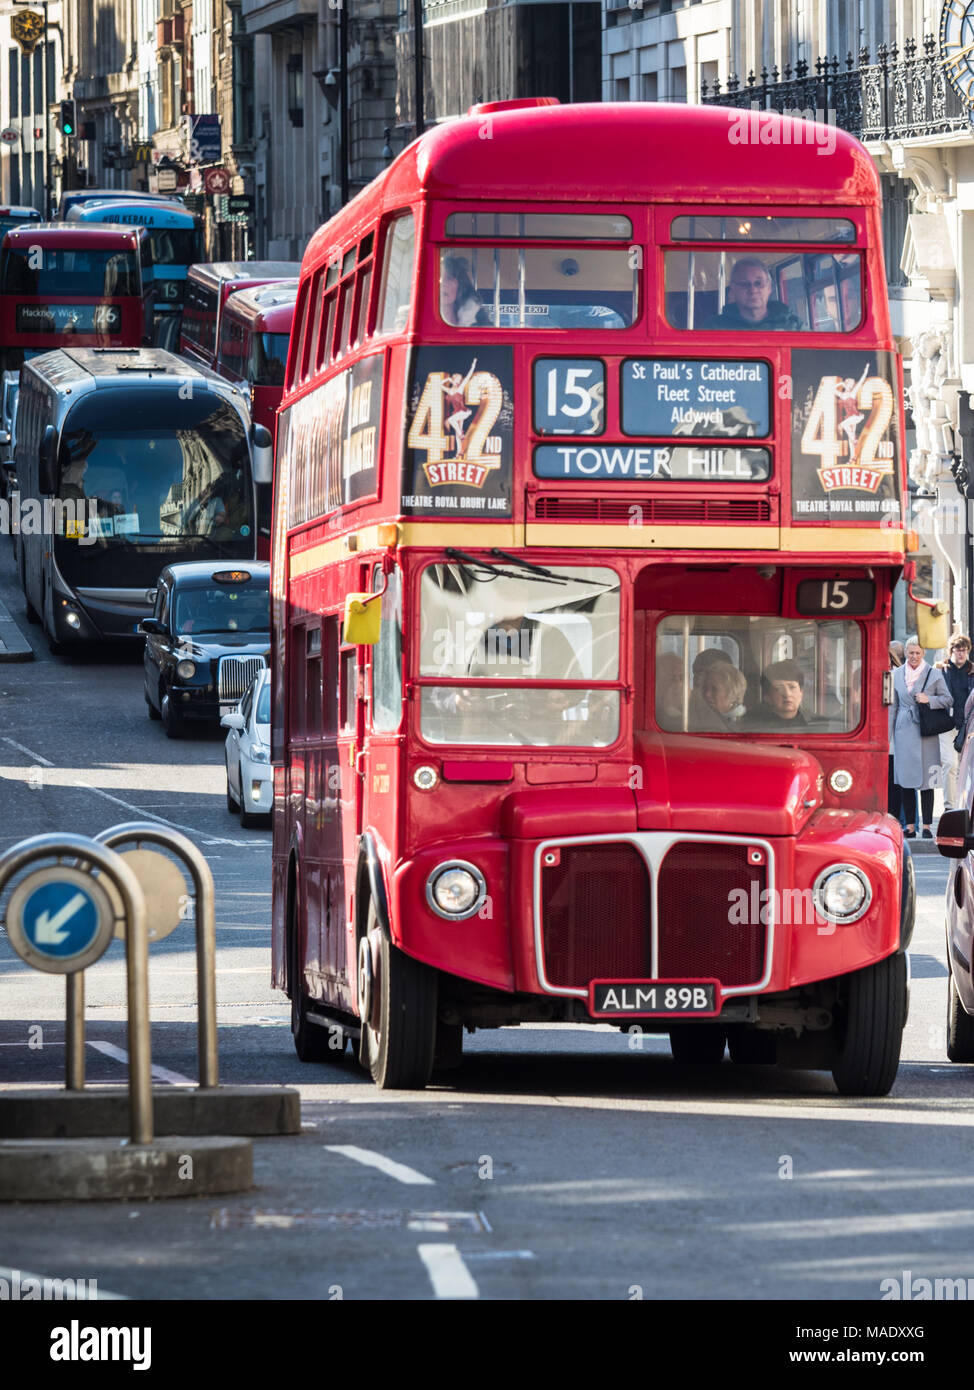 Classic London Bus - Vintage LT Routemaster still used on a heritage route 15 in central London between Trafalgar Square and Tower Hill Stock Photo